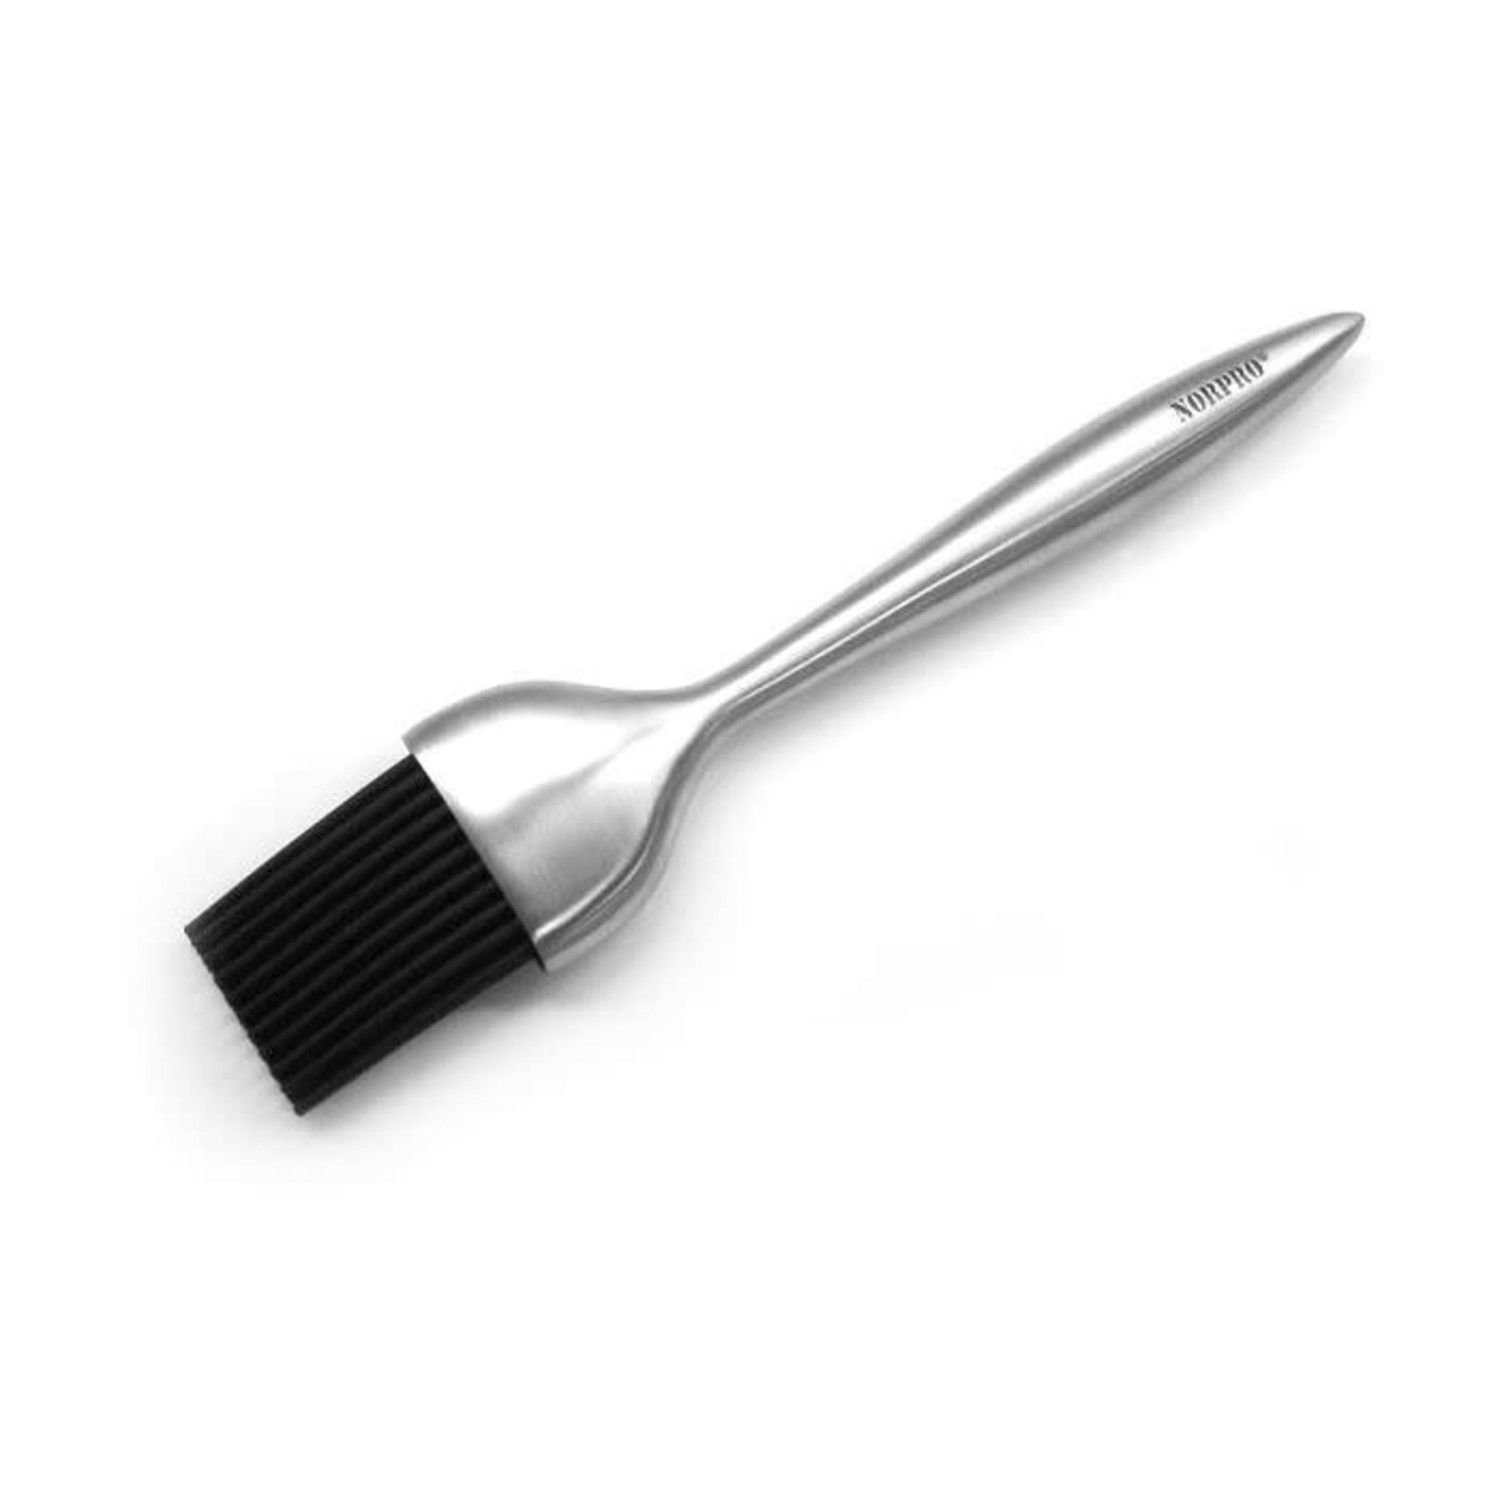 Thermohauser 2 3/8 in. Silicone Pastry Brush